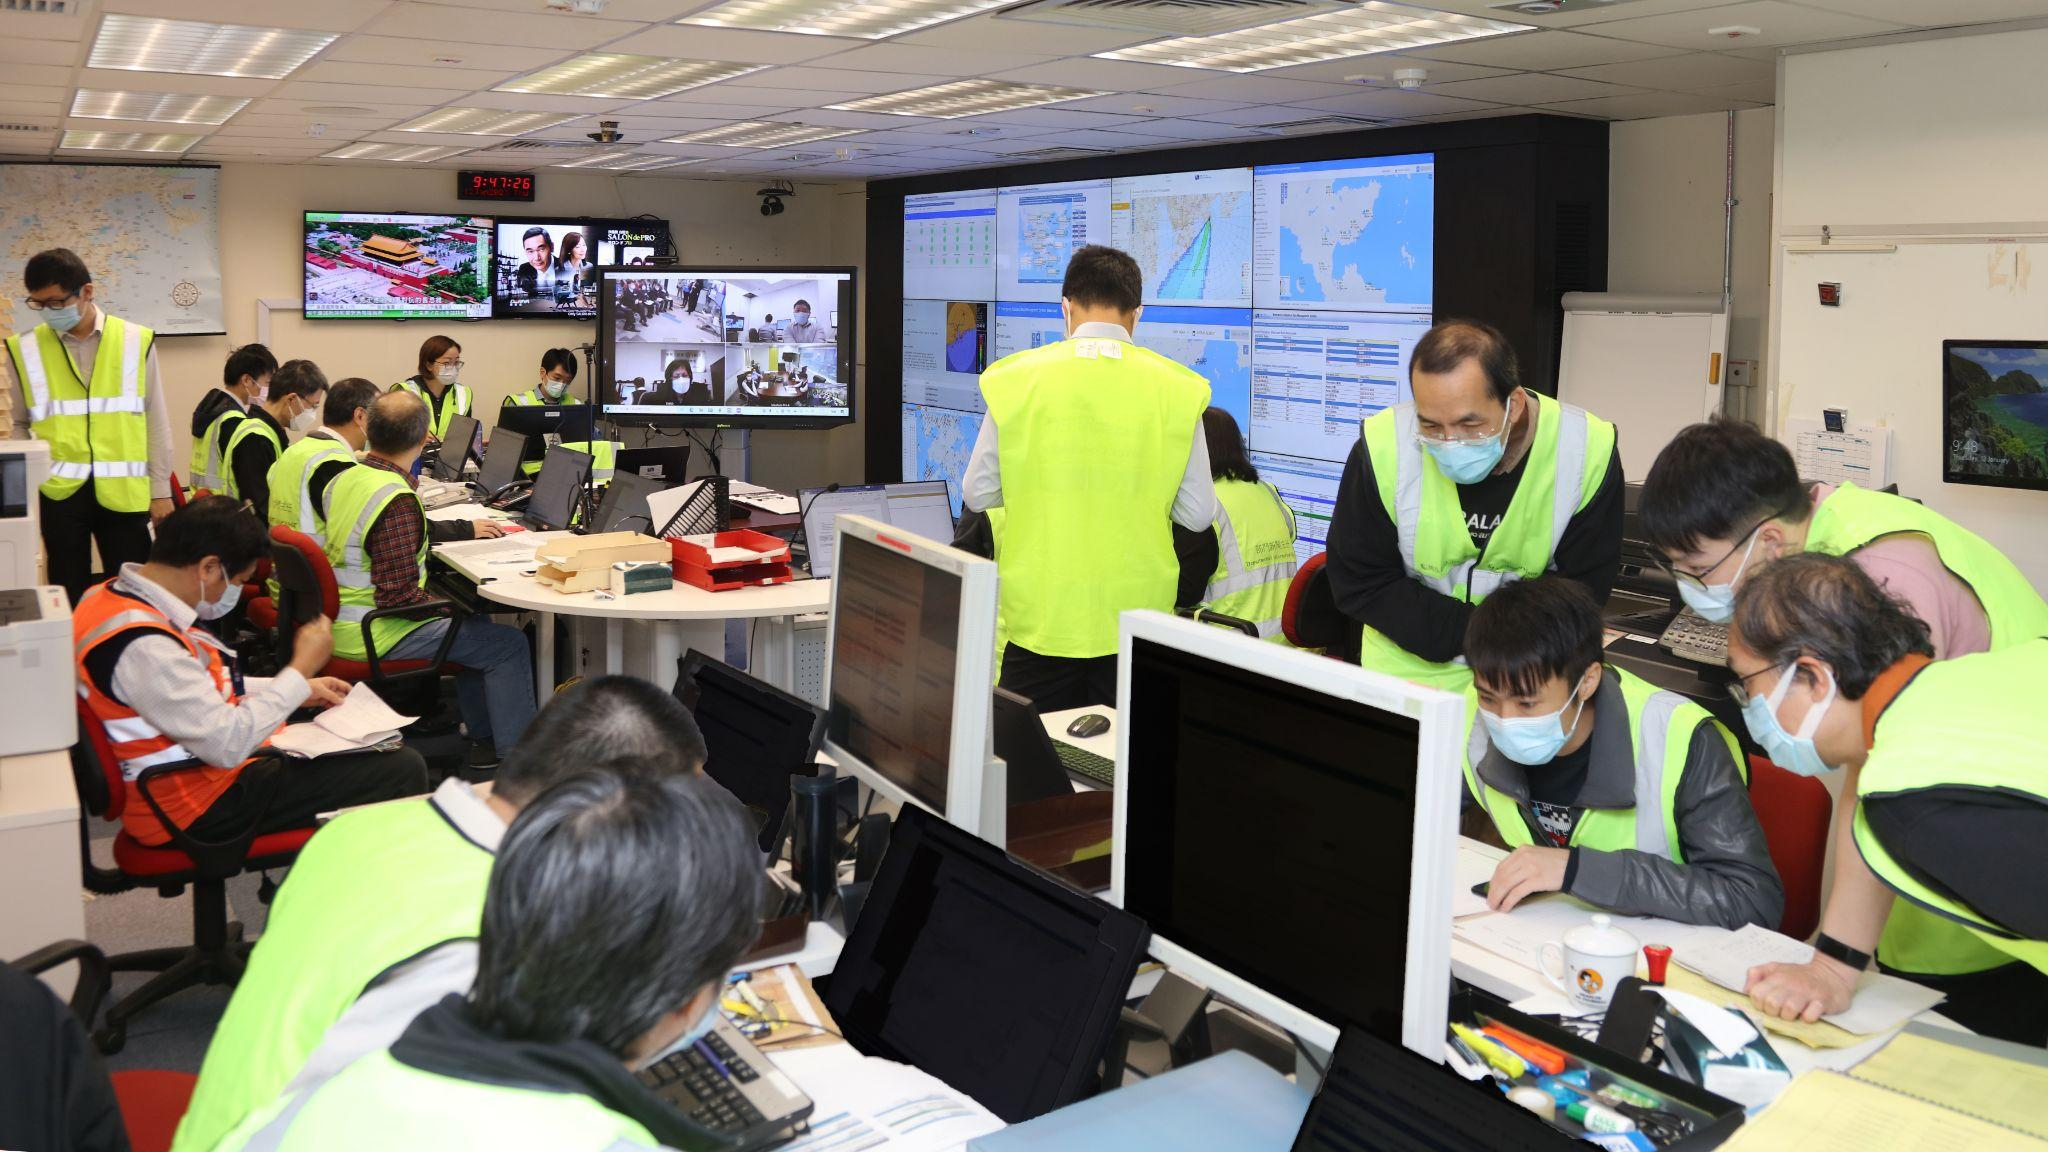 Observatory Participates in “Checkerboard III” Interdepartmental Exercise Based on the Contingency Plan for Daya Bay 